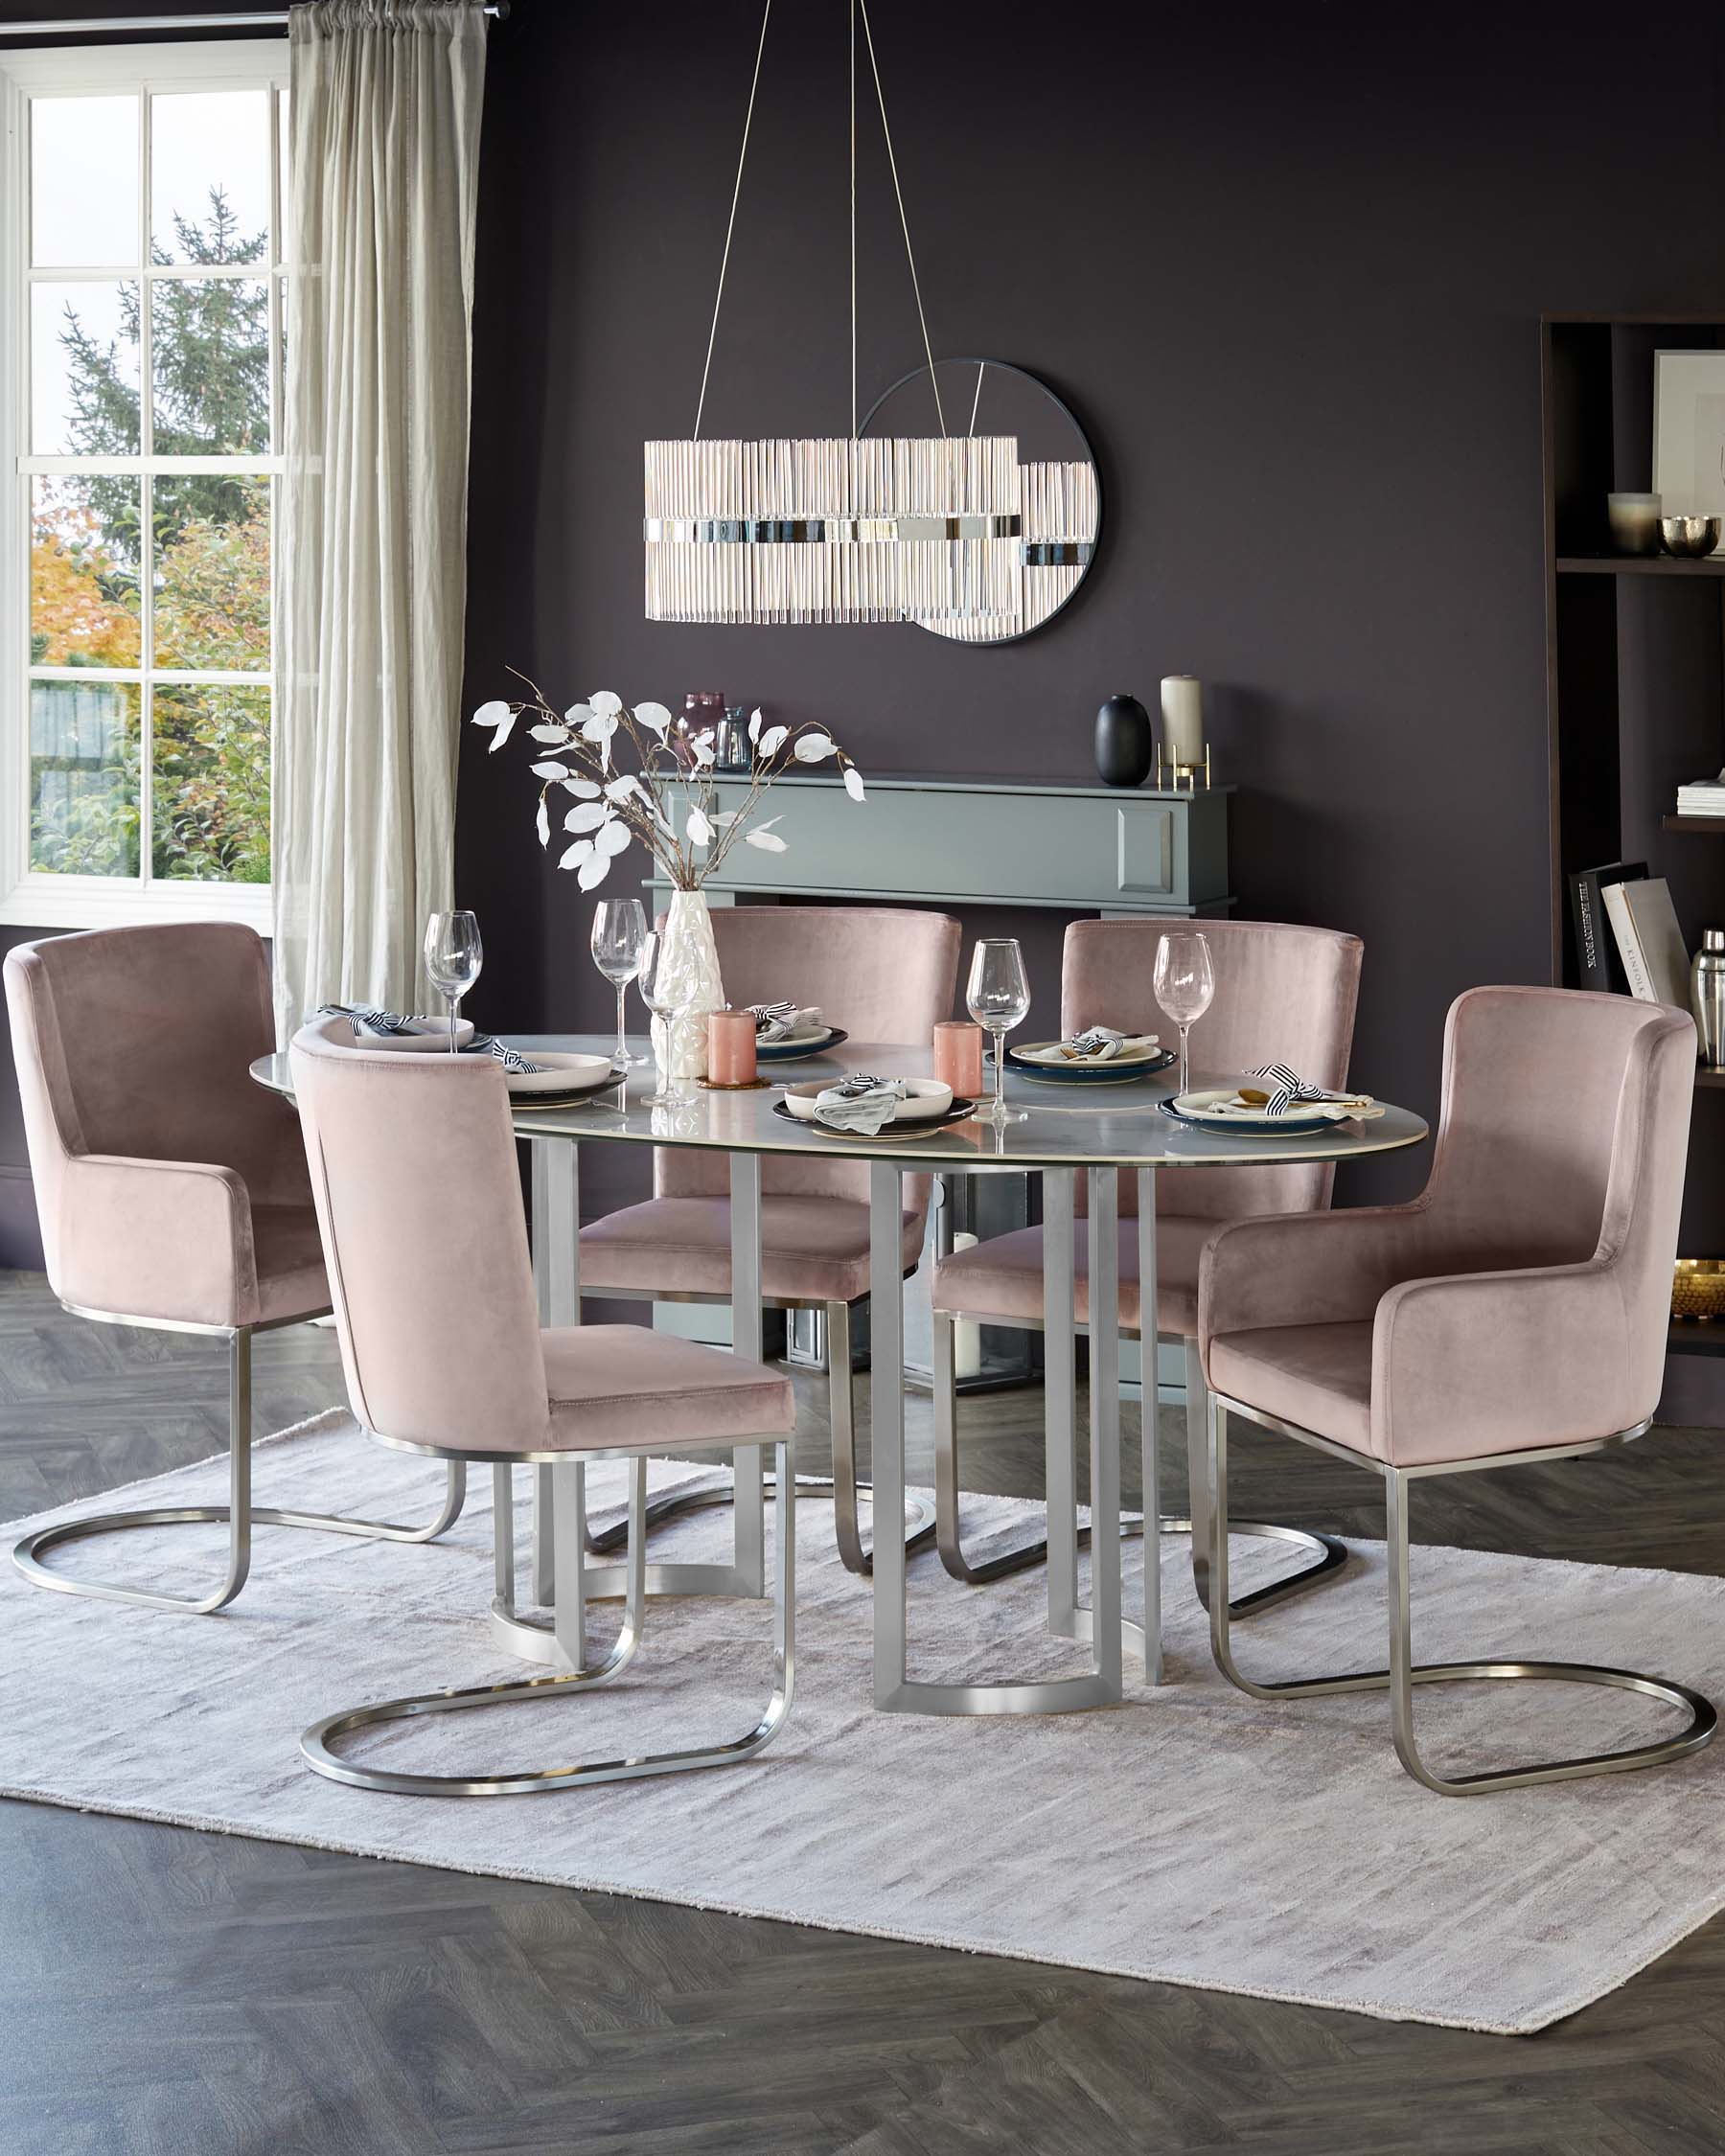 Skylar White Marbled Ceramic And Stainless Steel 6 Seater Dining Table